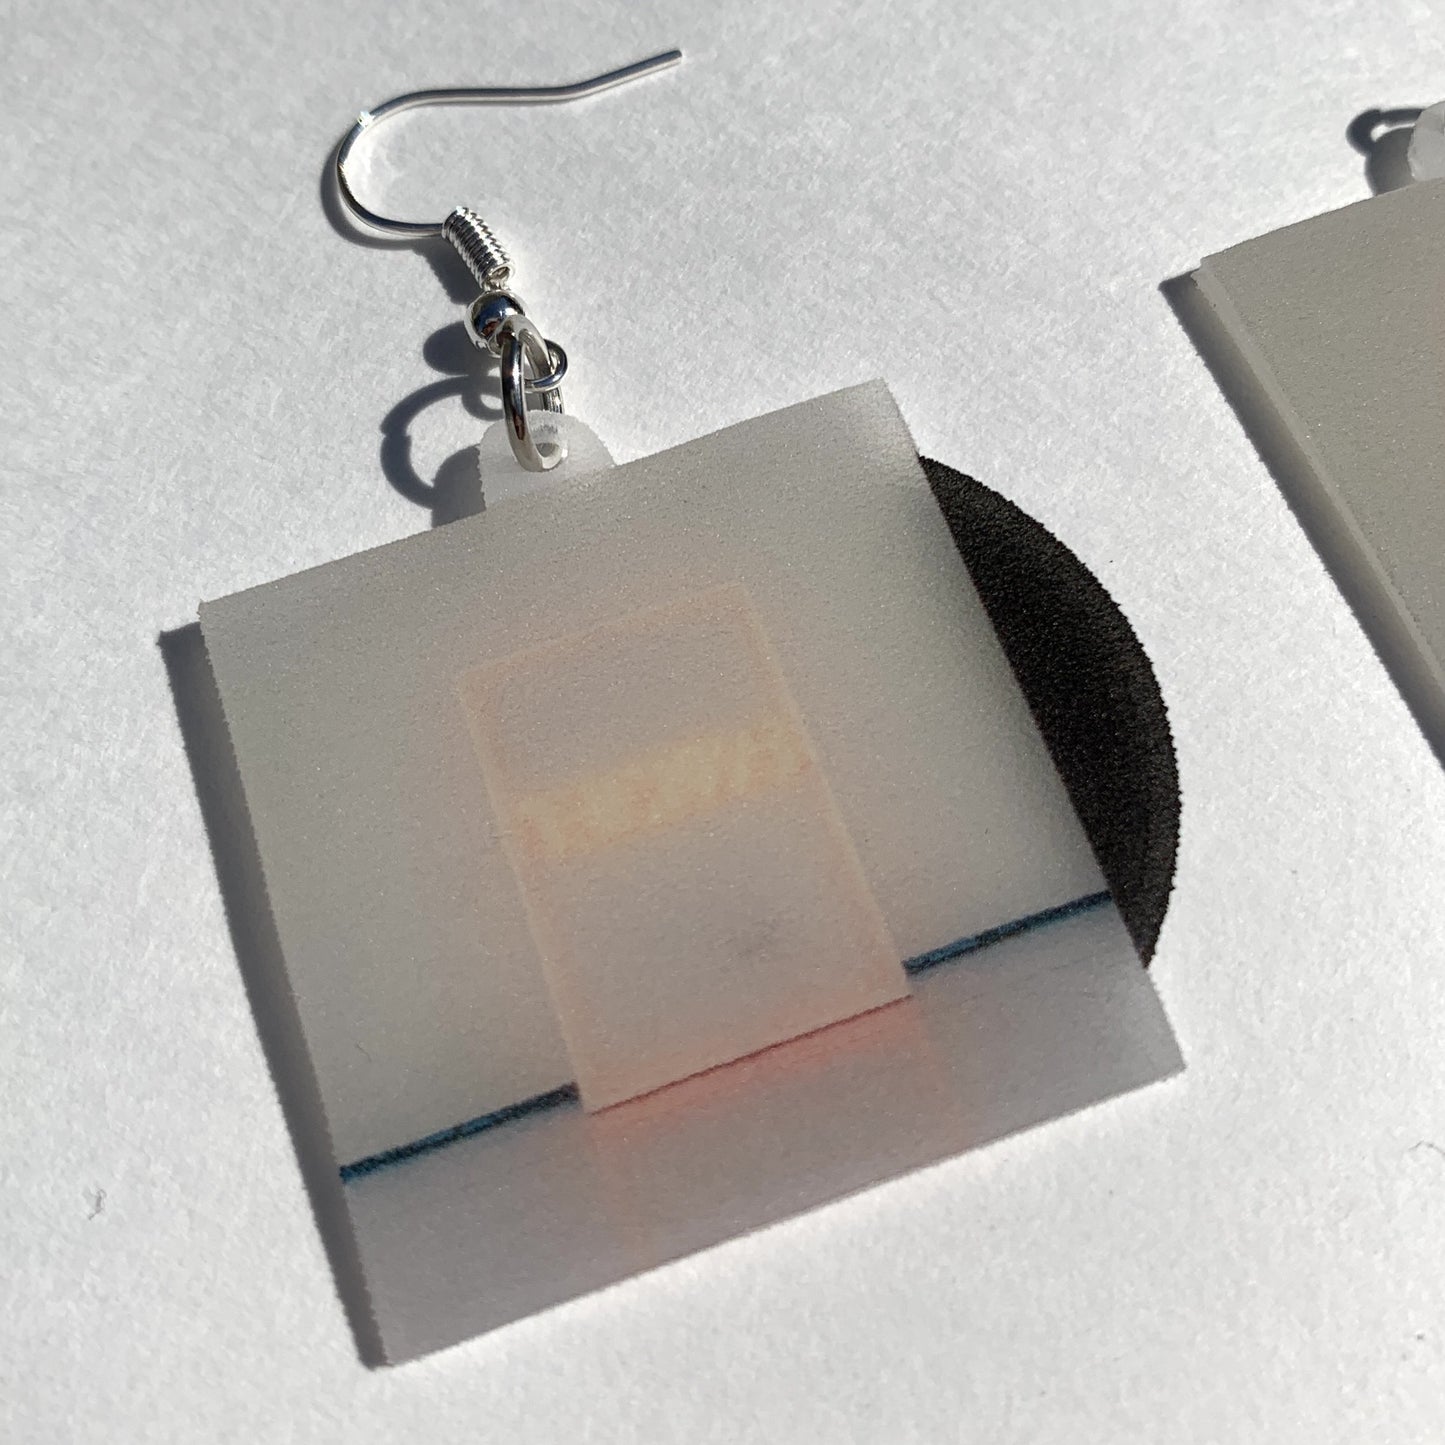 The 1975 I Like It When You Sleep, for You Are So Beautiful Yet So Unaware of It Vinyl Album Handmade Earrings!